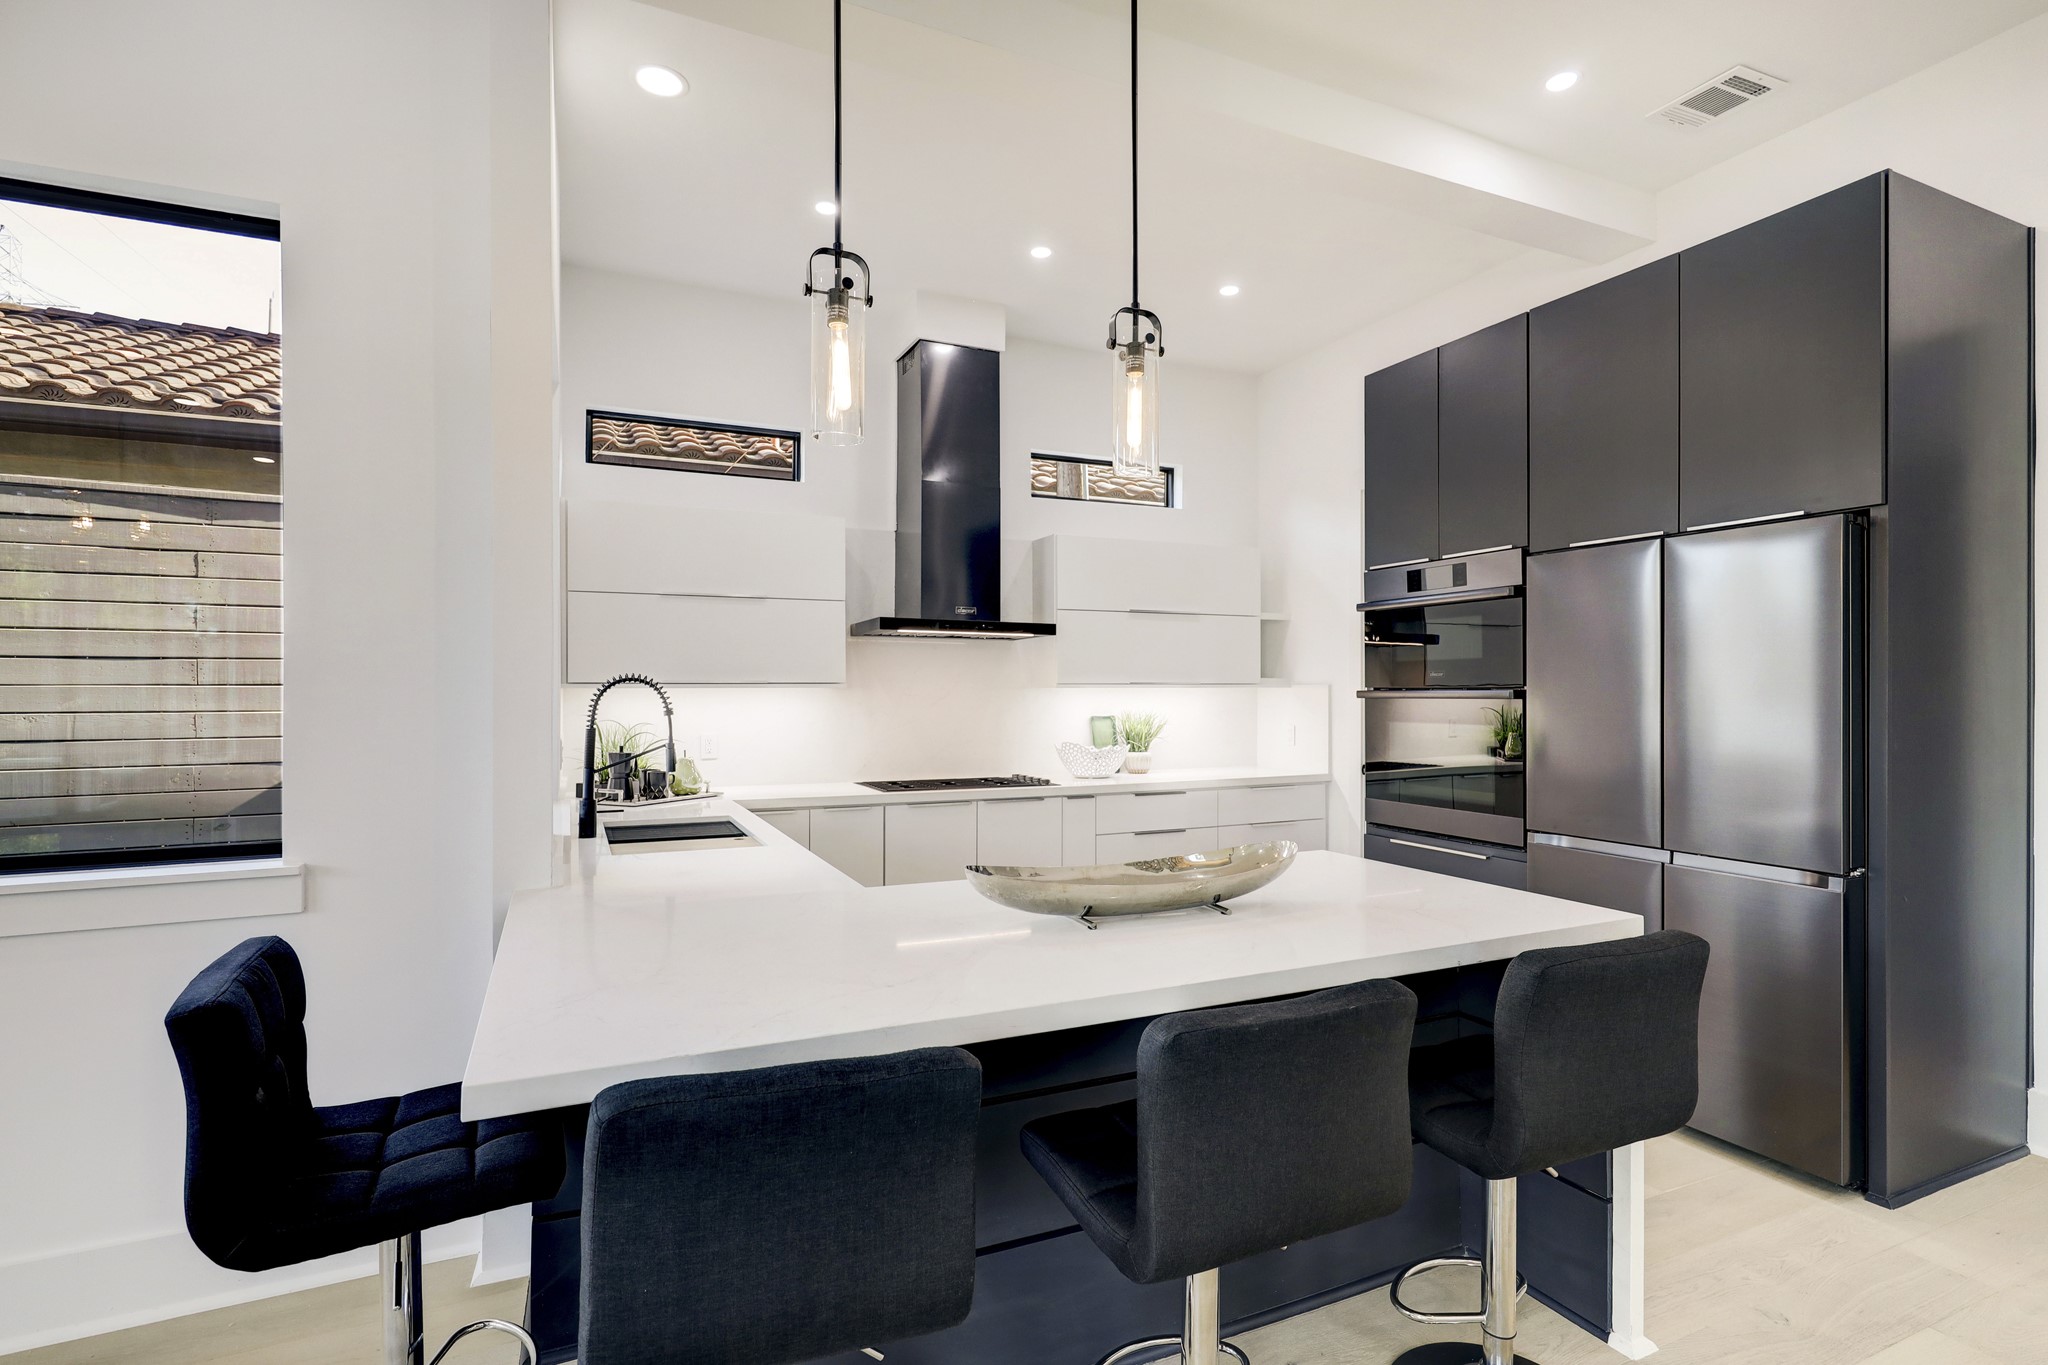 This spectacular kitchen is ready for you to show off your culinary skills. Find gorgeous Calacatta Quartz countertops and backsplash with under-cabinet lights, custom cabinetry with soft close features, high-end Decor appliances, a butler's pantry, incredible lighting and more.